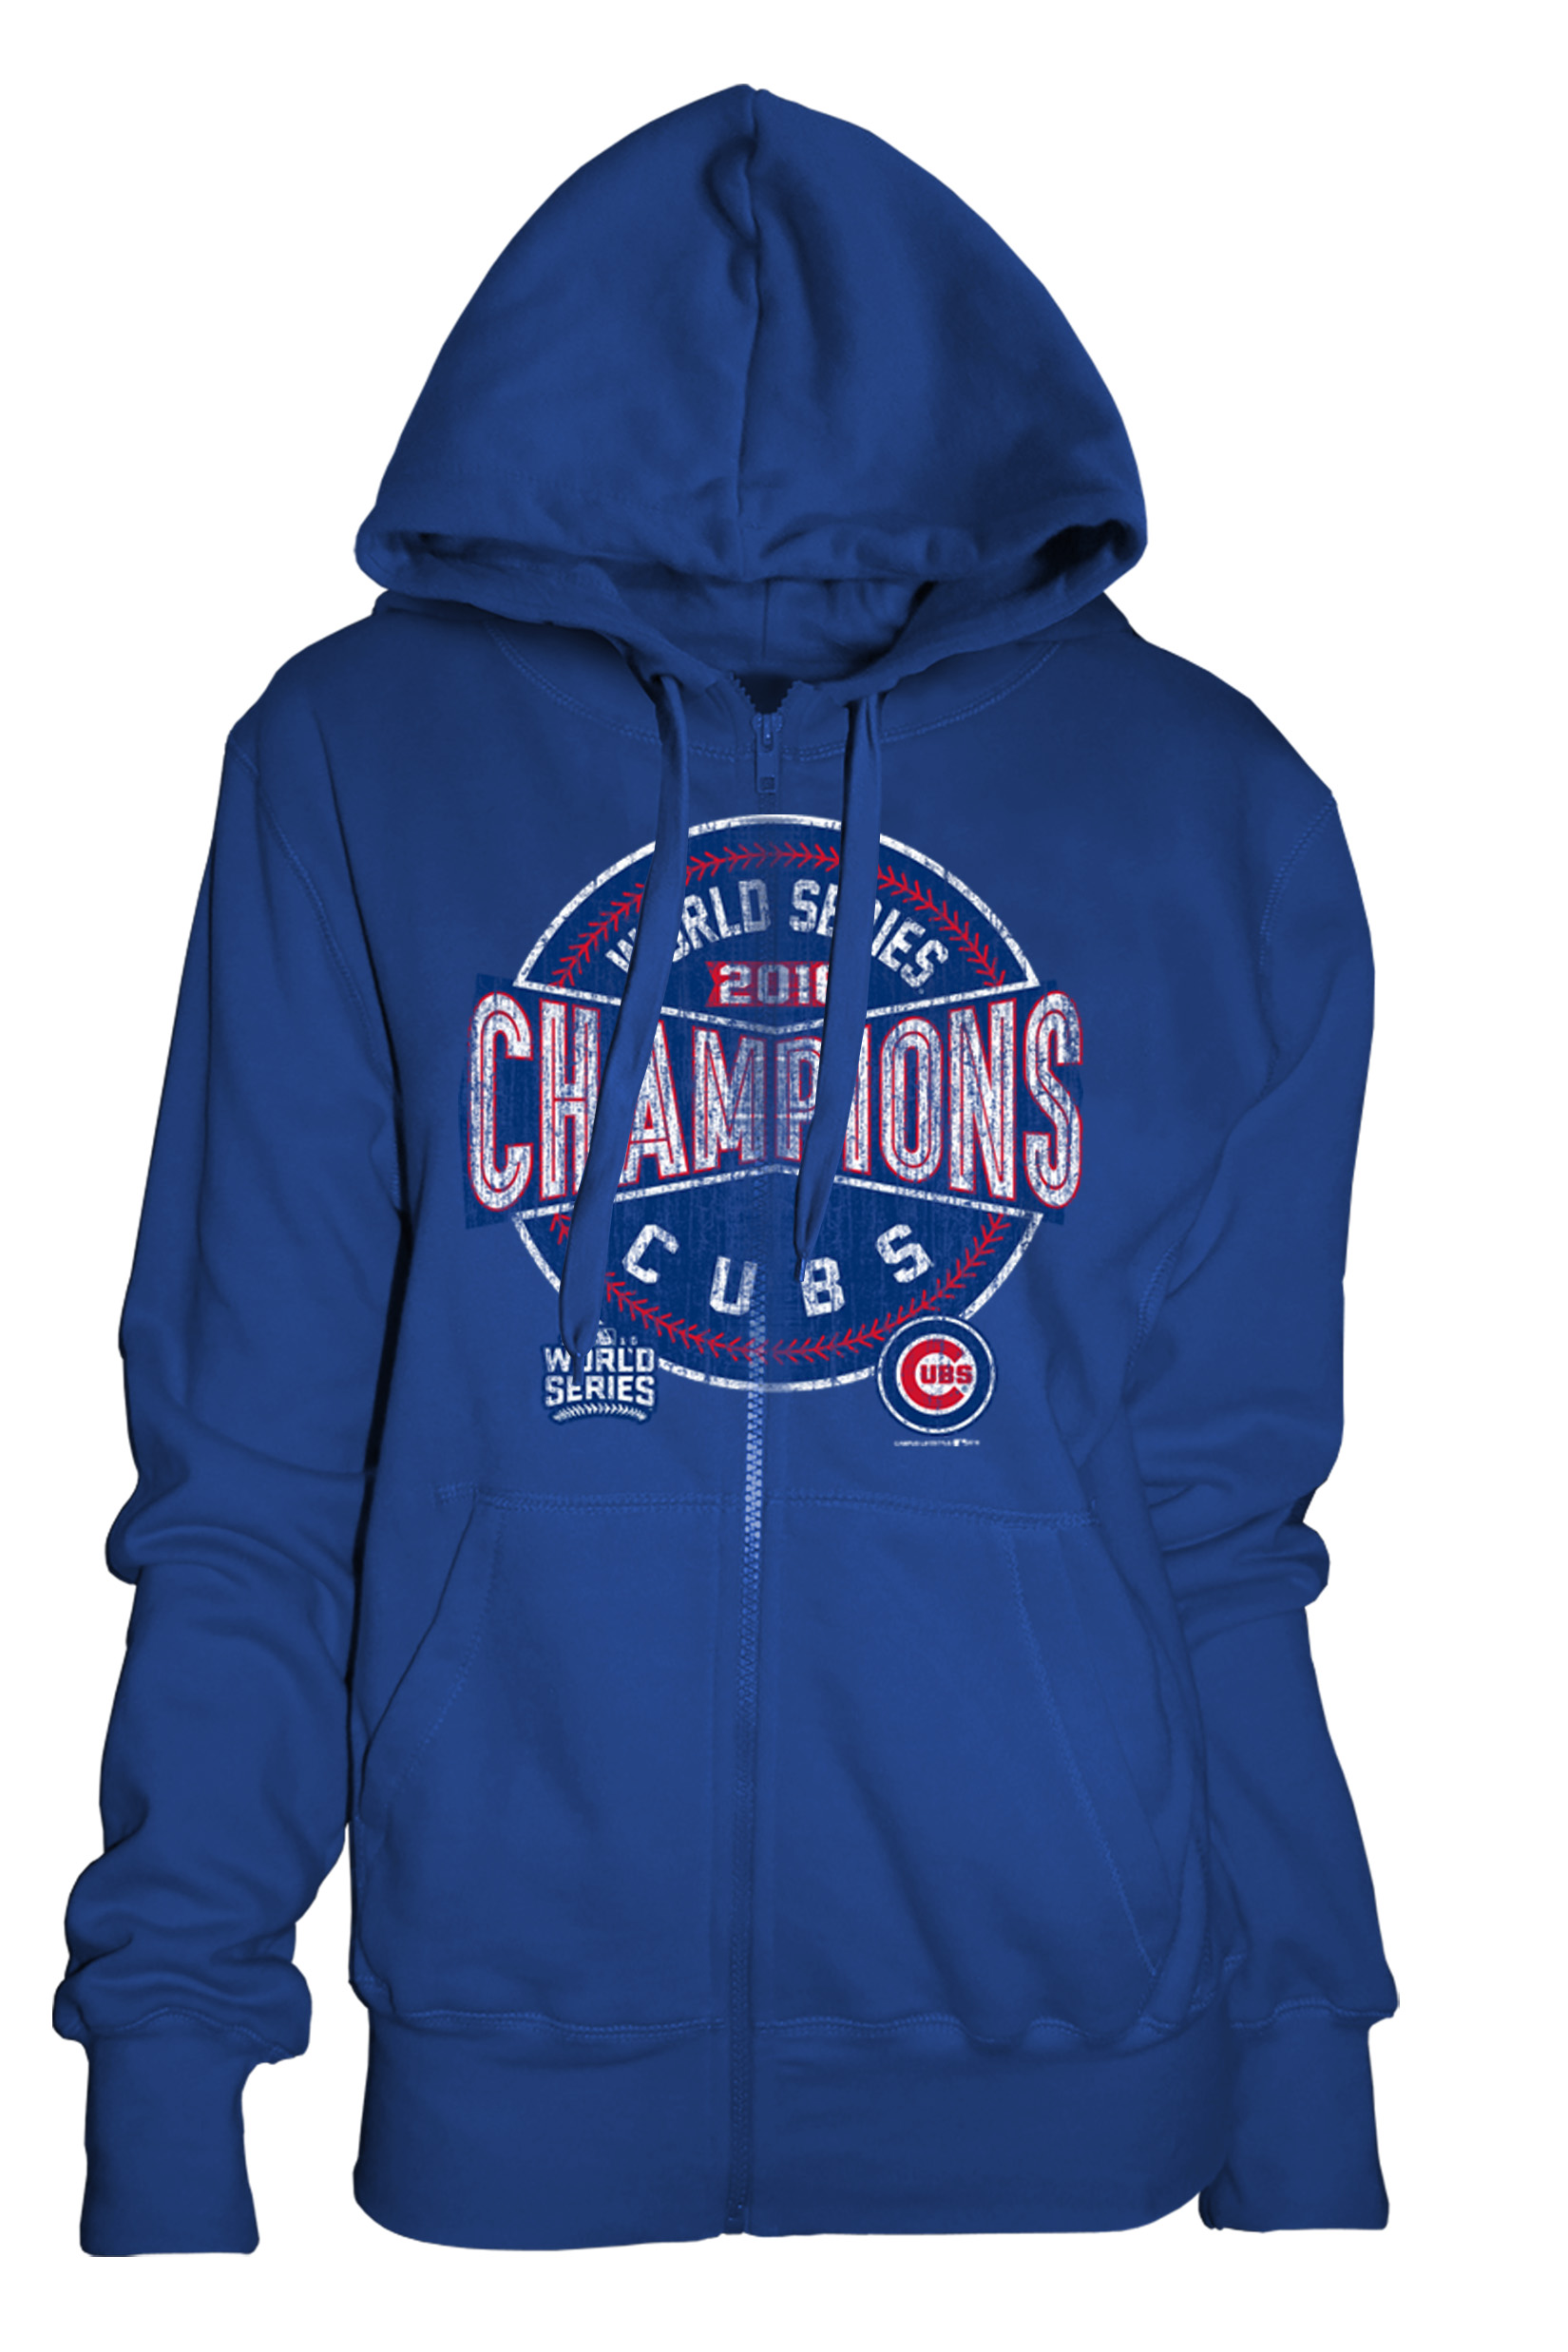 MLB Chicago Cubs 2016 World Series Champions Women's Hoodie